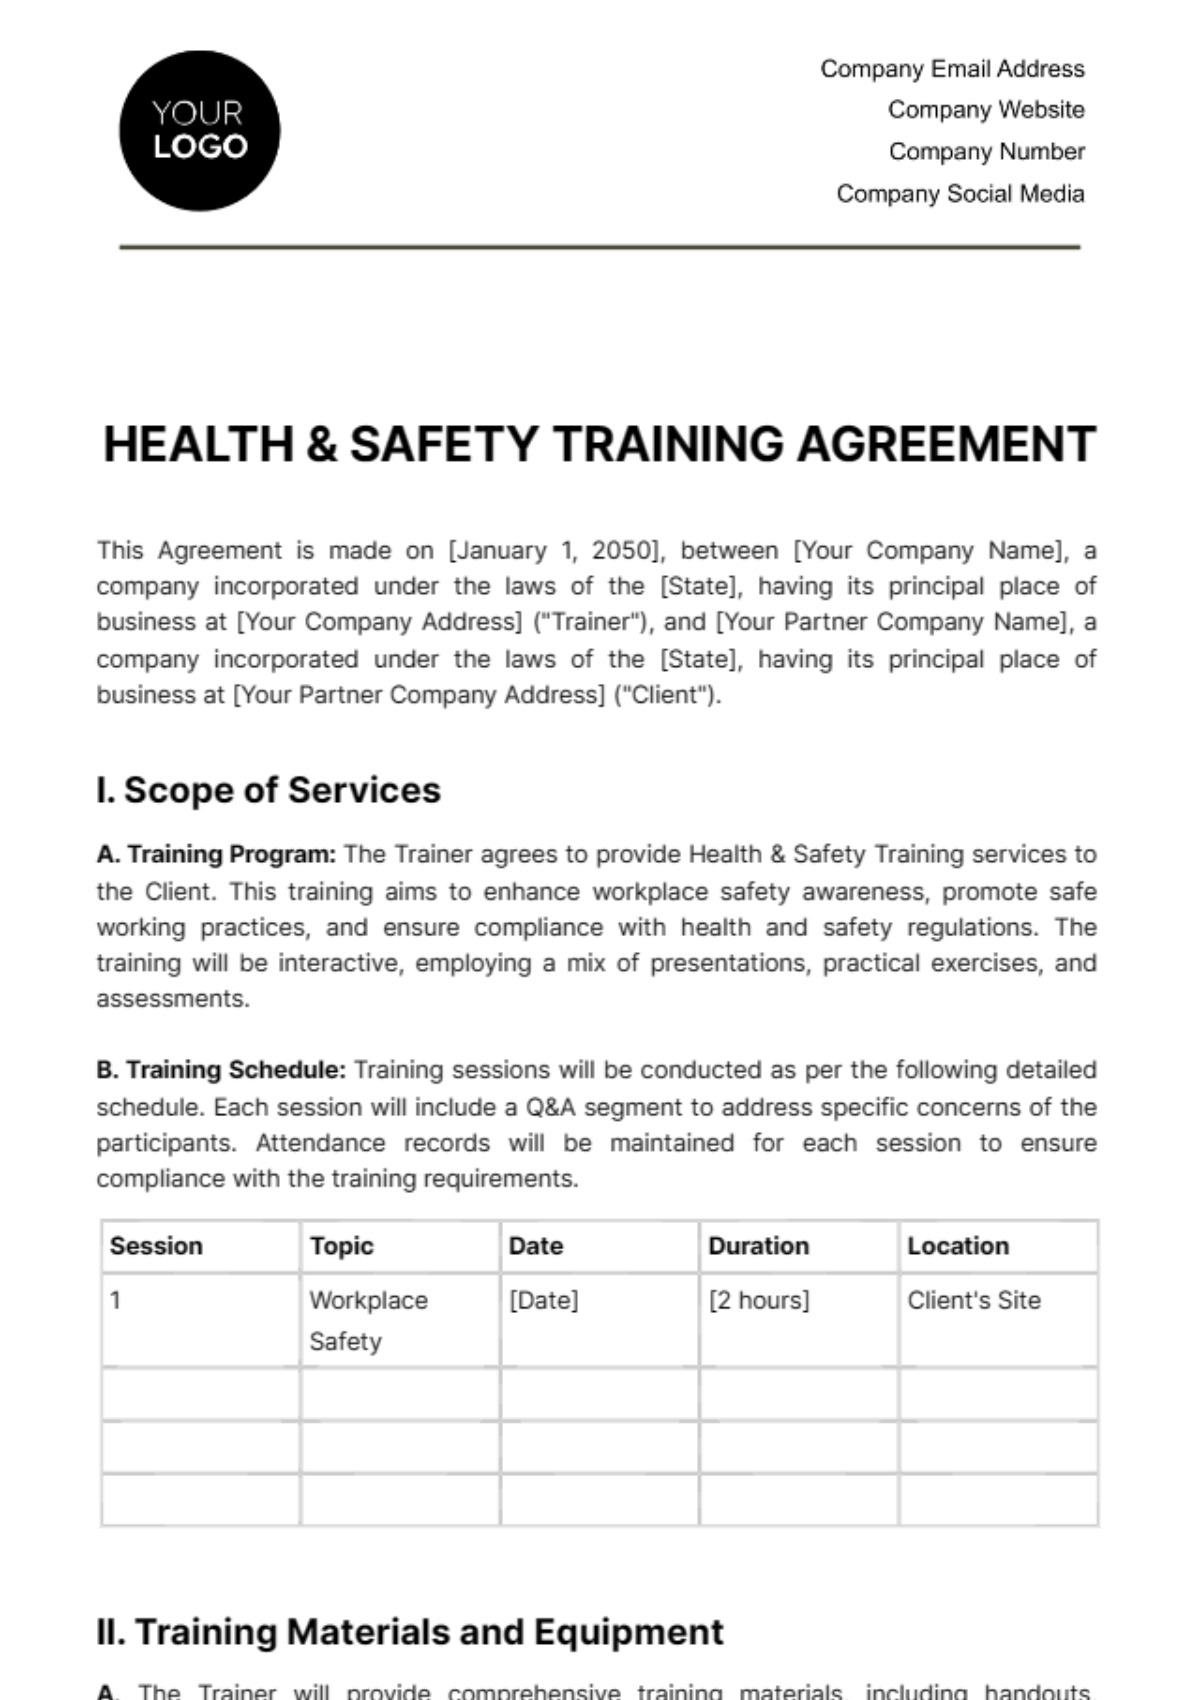 Health & Safety Training Agreement Template